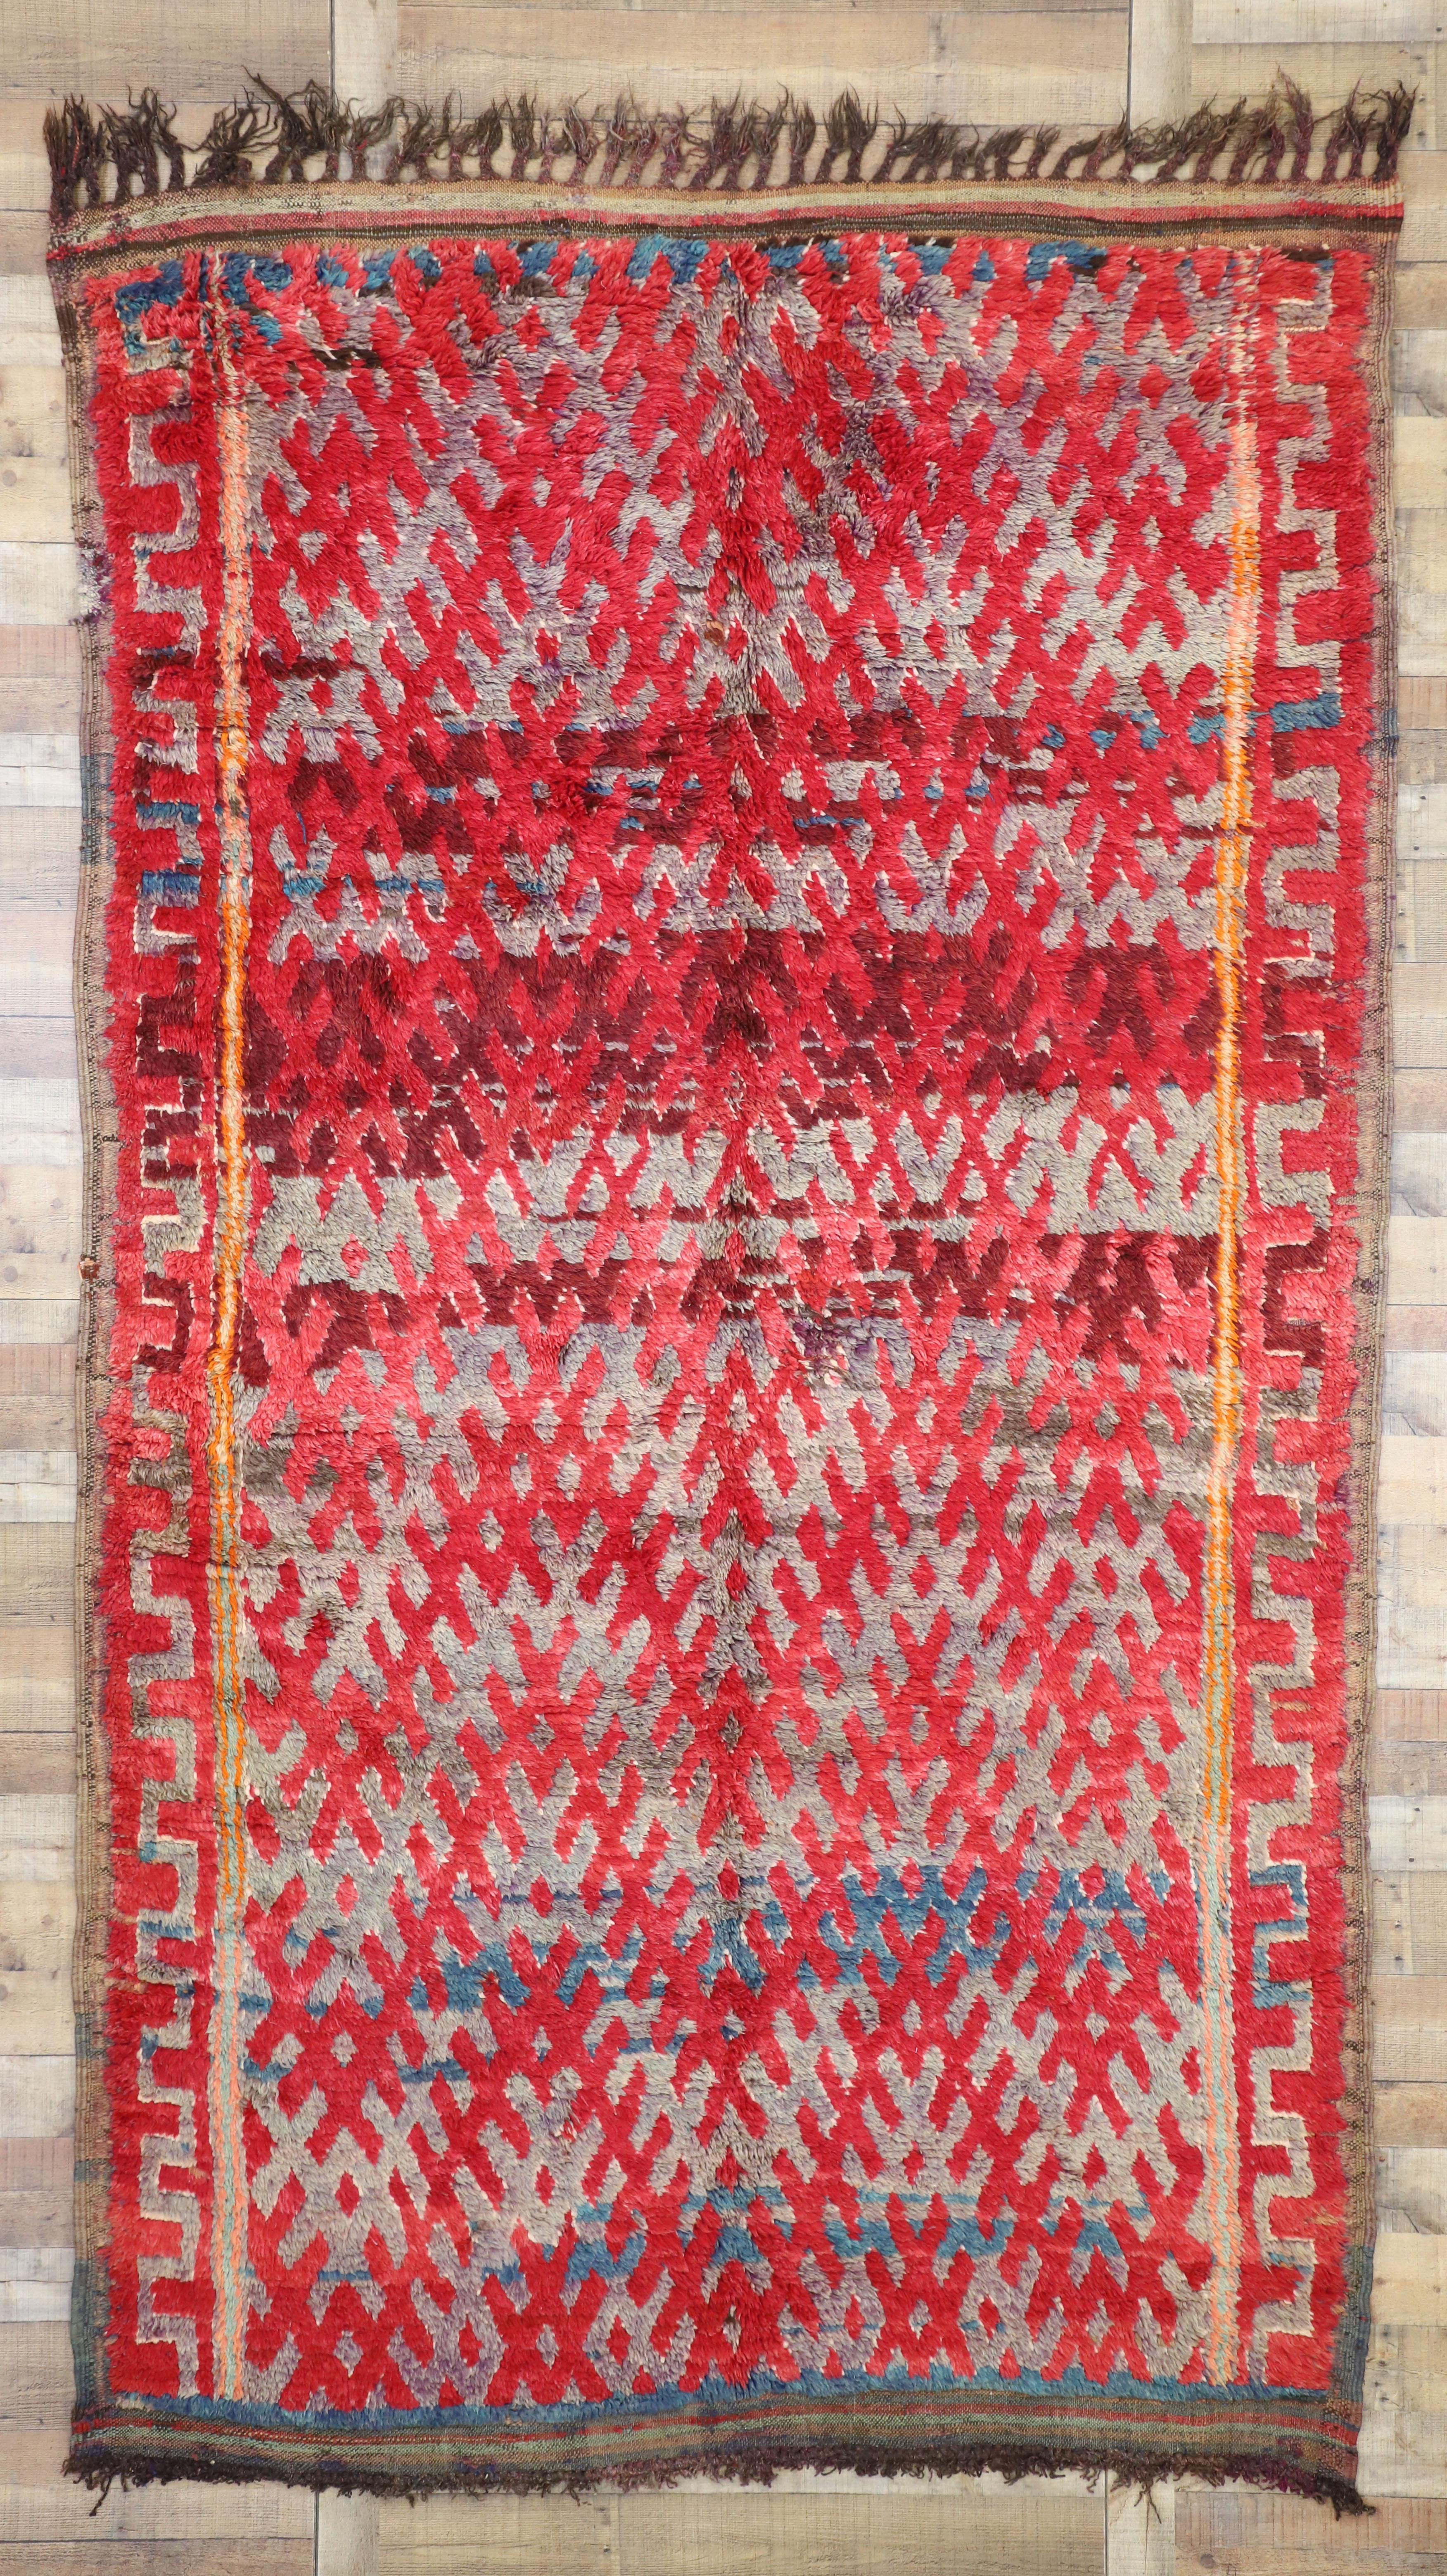 Vintage Moroccan Rug, Berber Moroccan Rug with Vibrant Mid-Century Modern Style 1